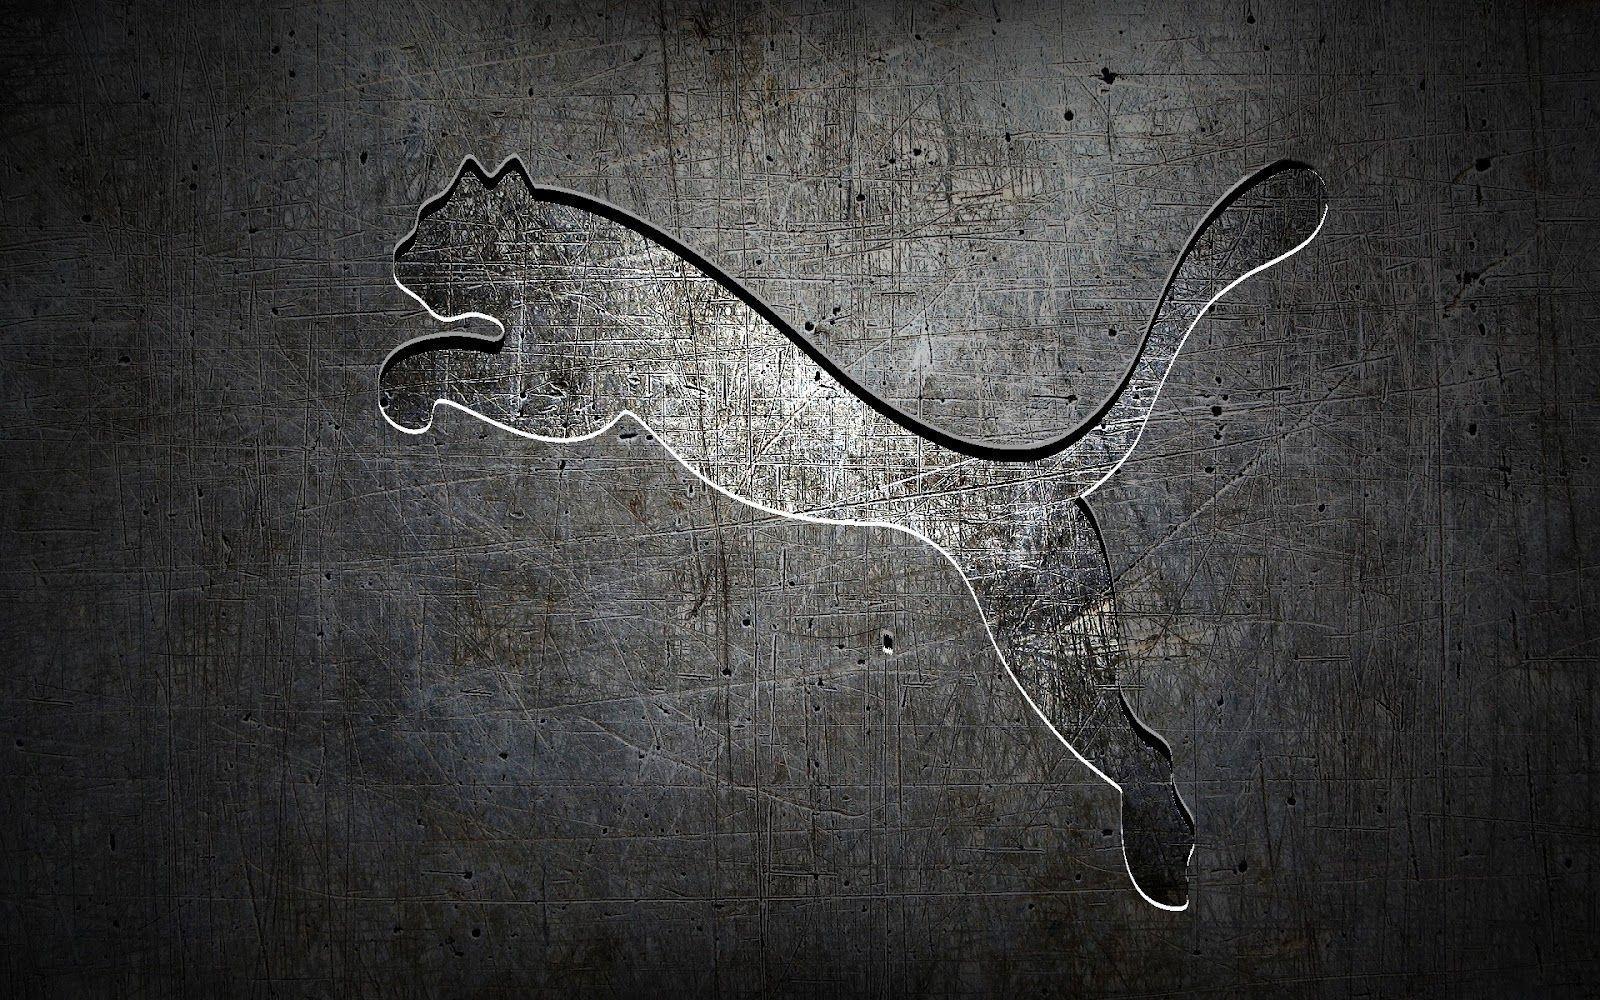 Grey Puma Logo Top Best HD Wallpaper Image Picture Free Download